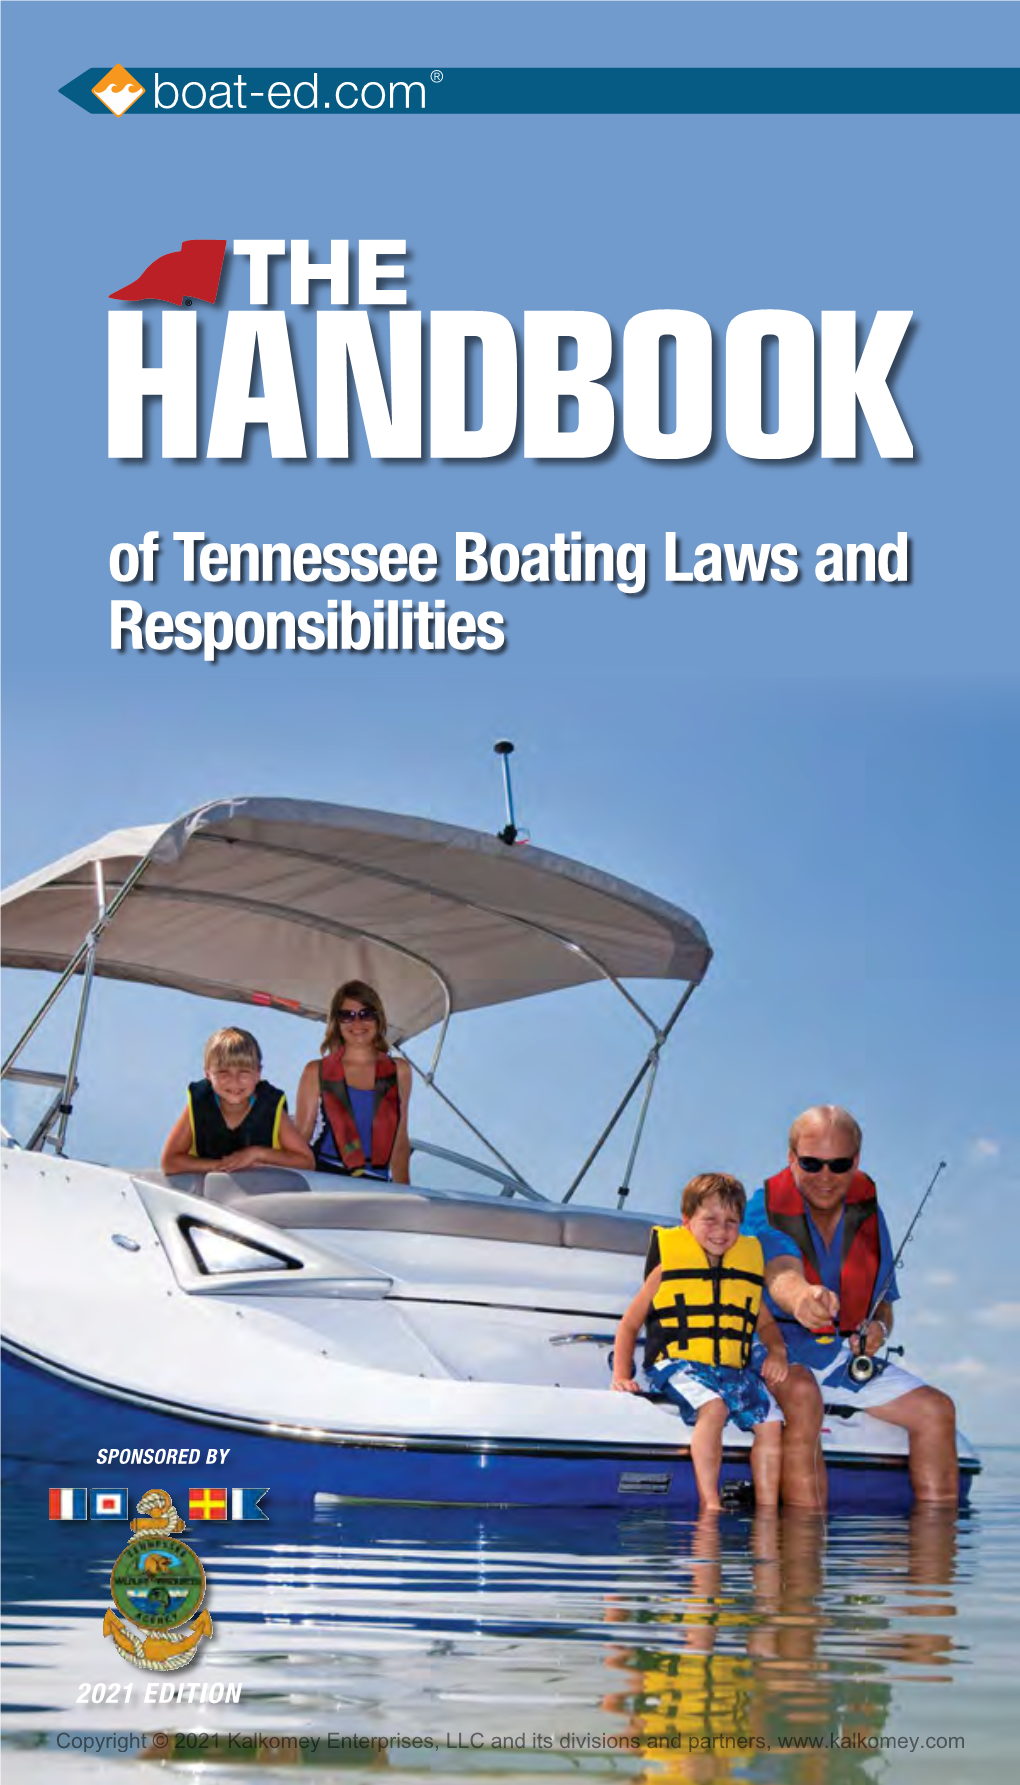 Of Tennessee Boating Laws and Responsibilities